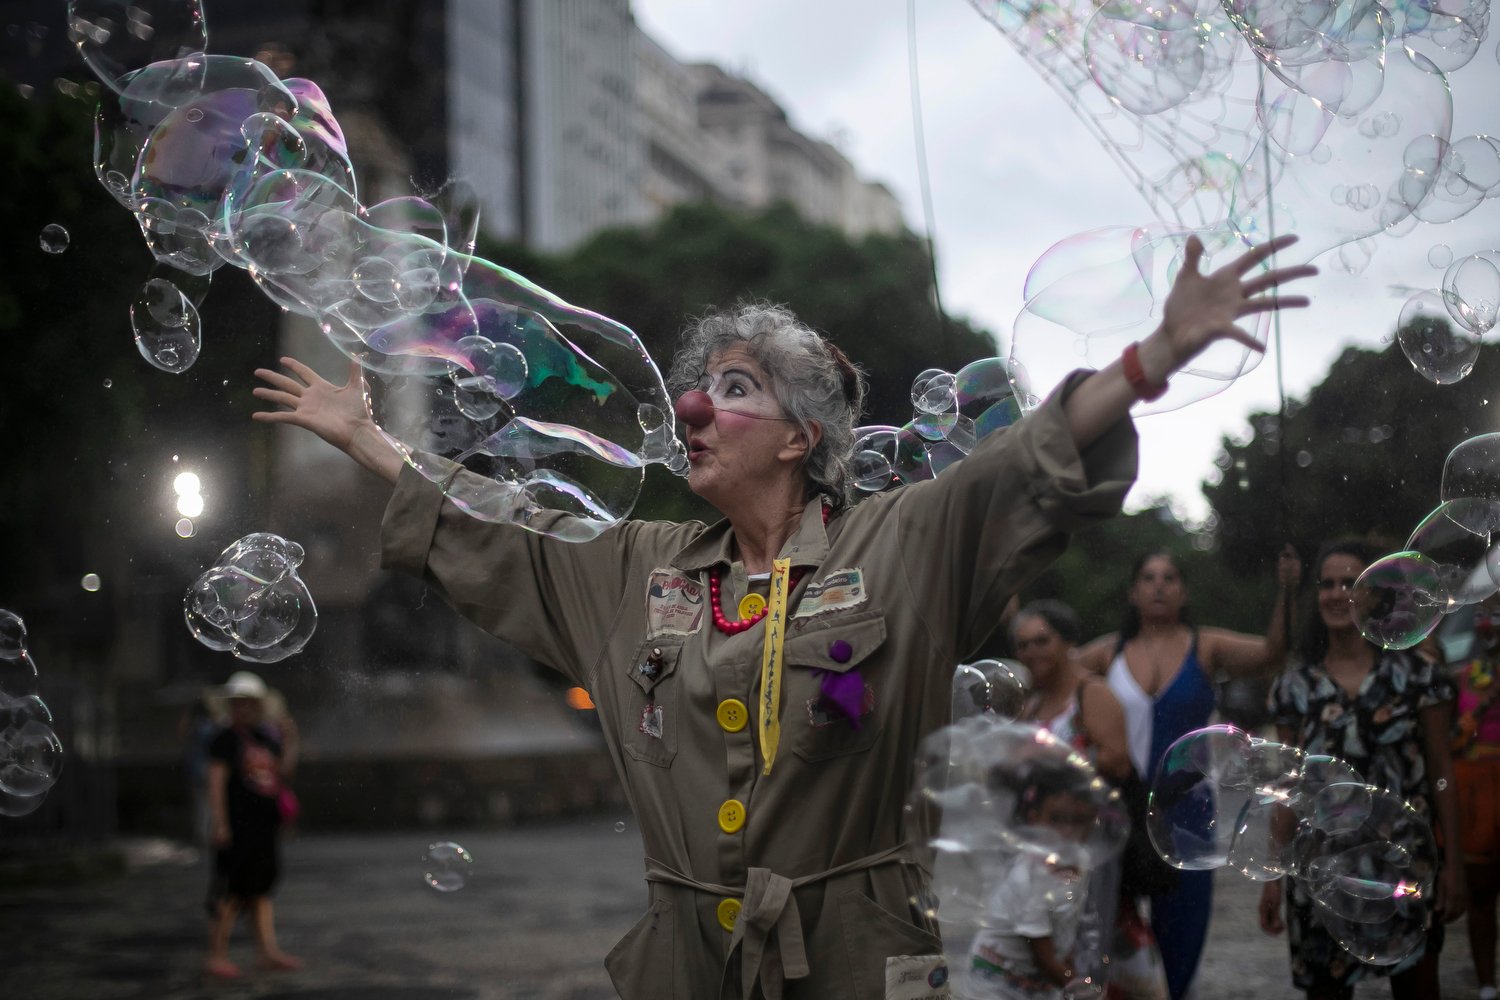  An artist dressed as a clown performs during a protest against the death of Venezuelan artist Julieta Hernández and violence against women, in Rio de Janeiro, Brazil, Jan. 12, 2024. The body of Hernández, who had been missing since Dec. 23 while tra